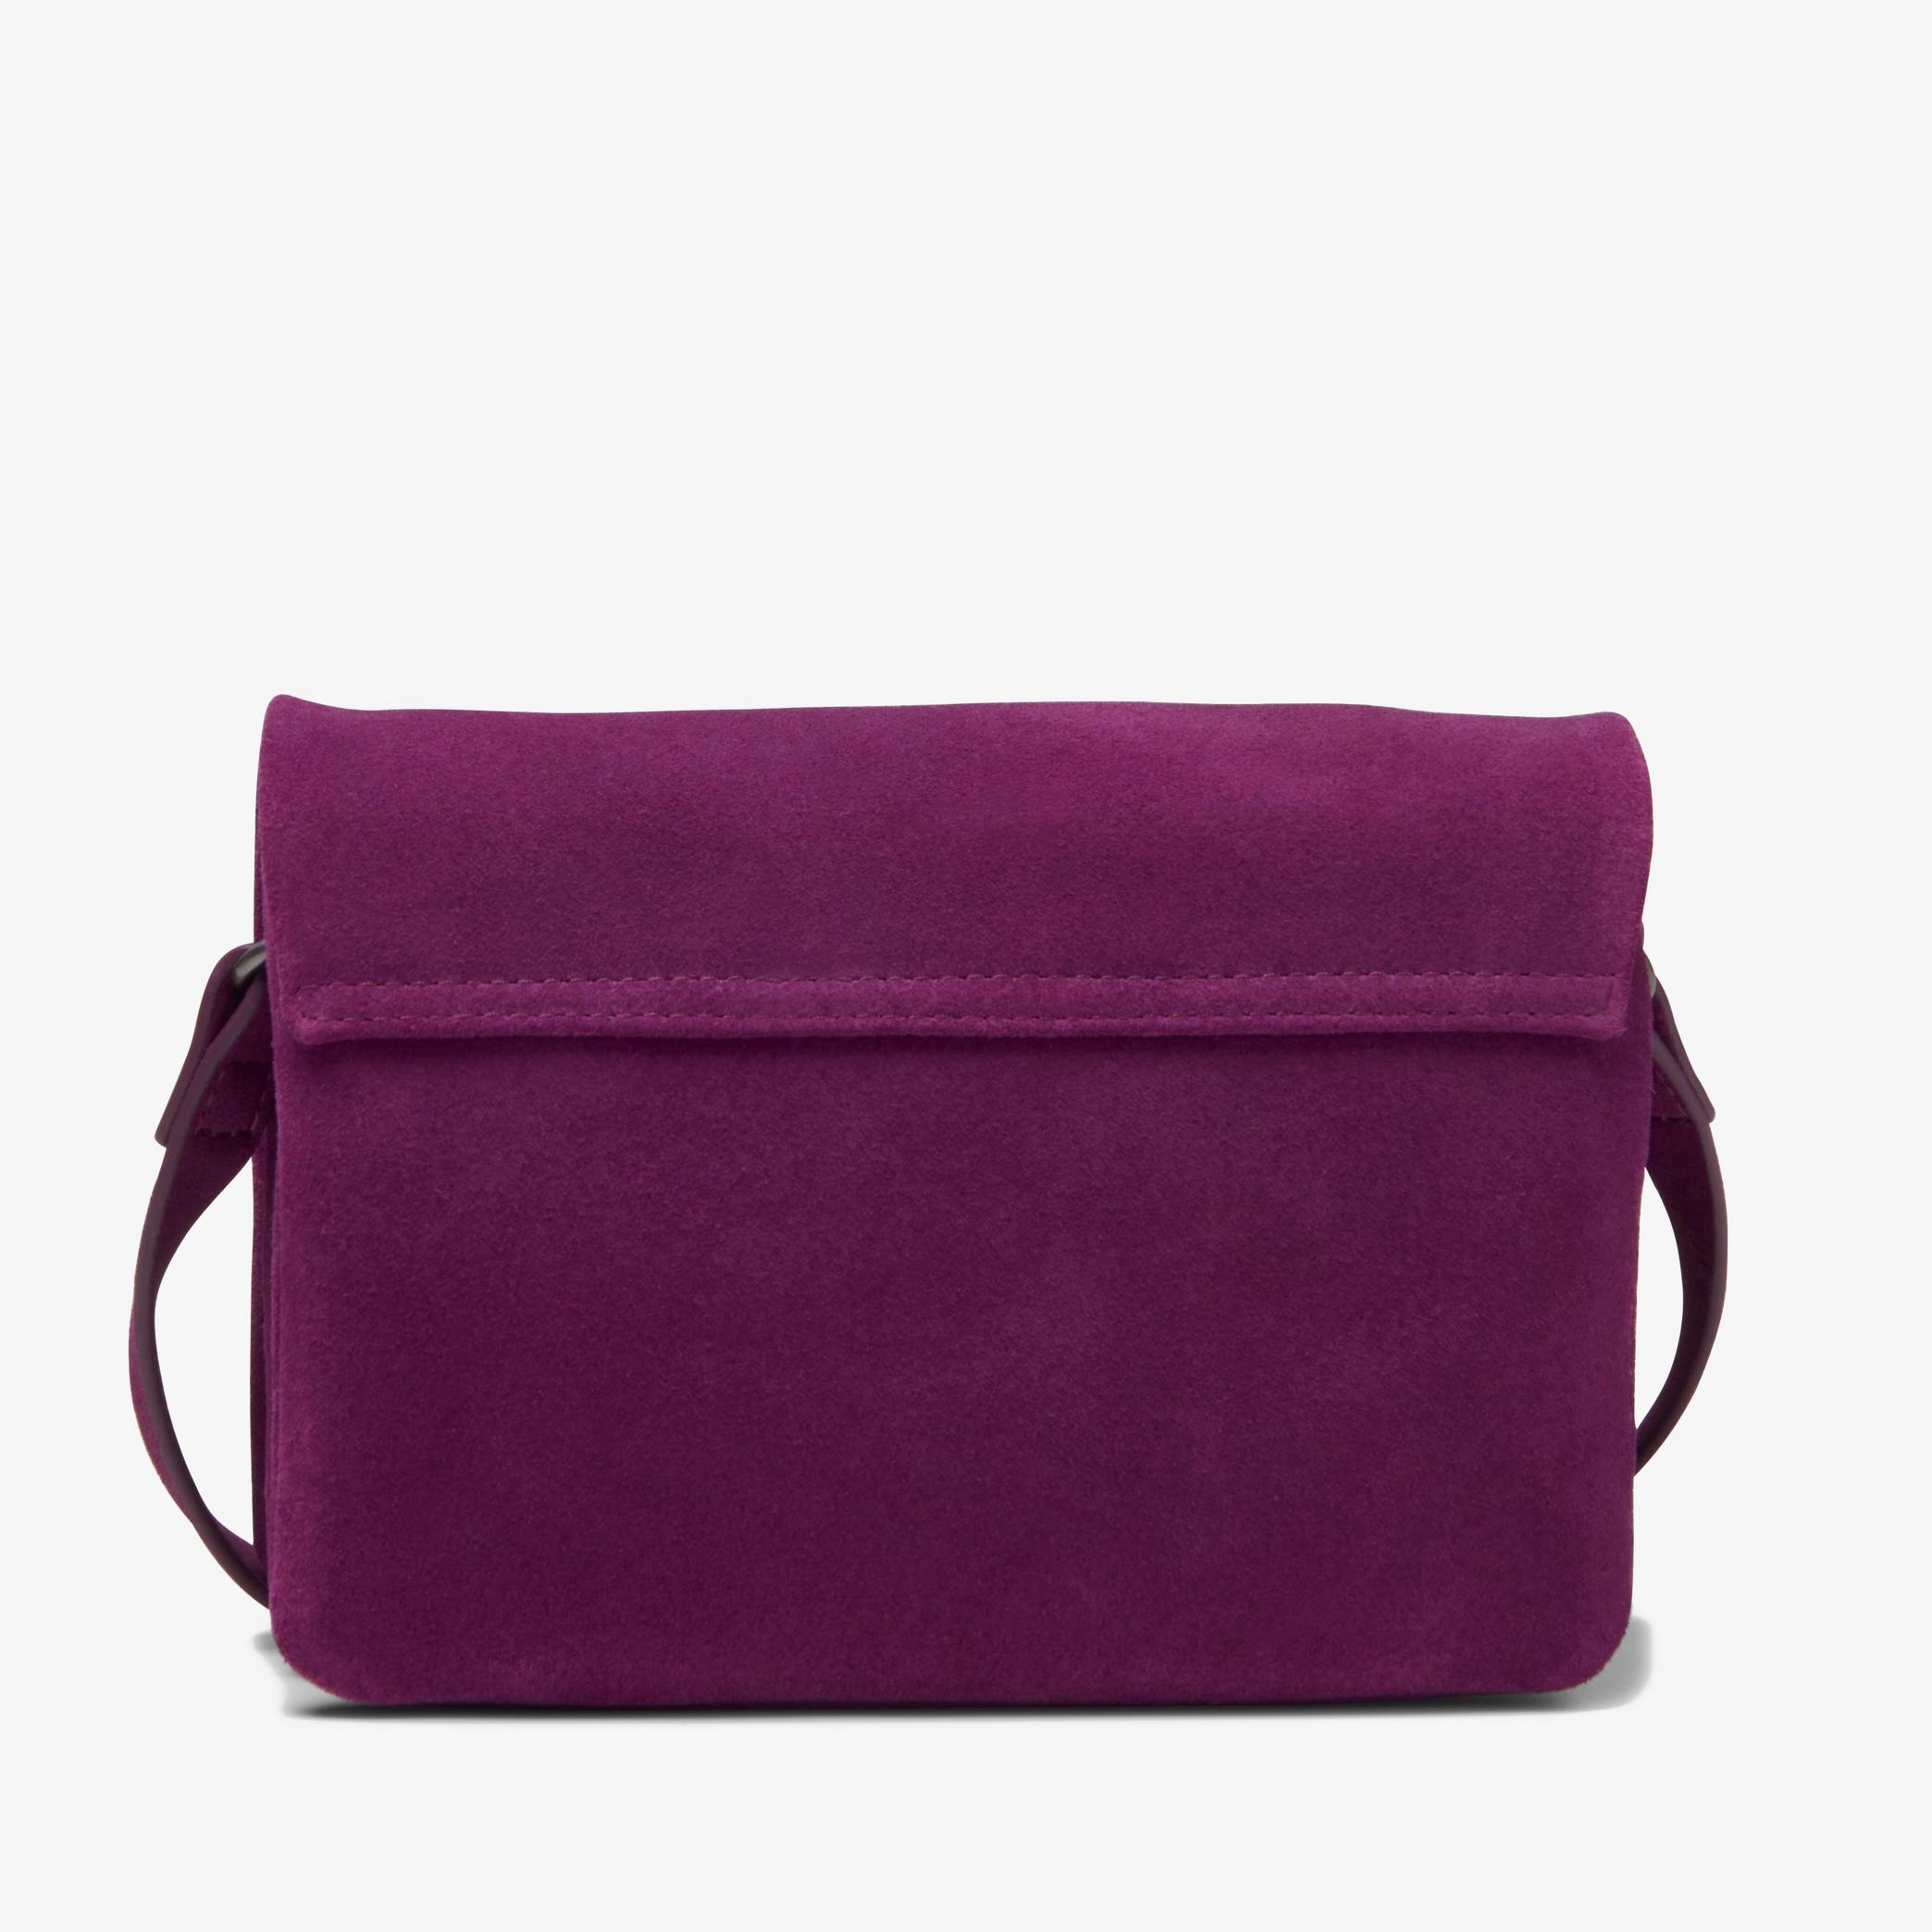 Treen Small Purple Suede Across Body Bag, view 2 of 4